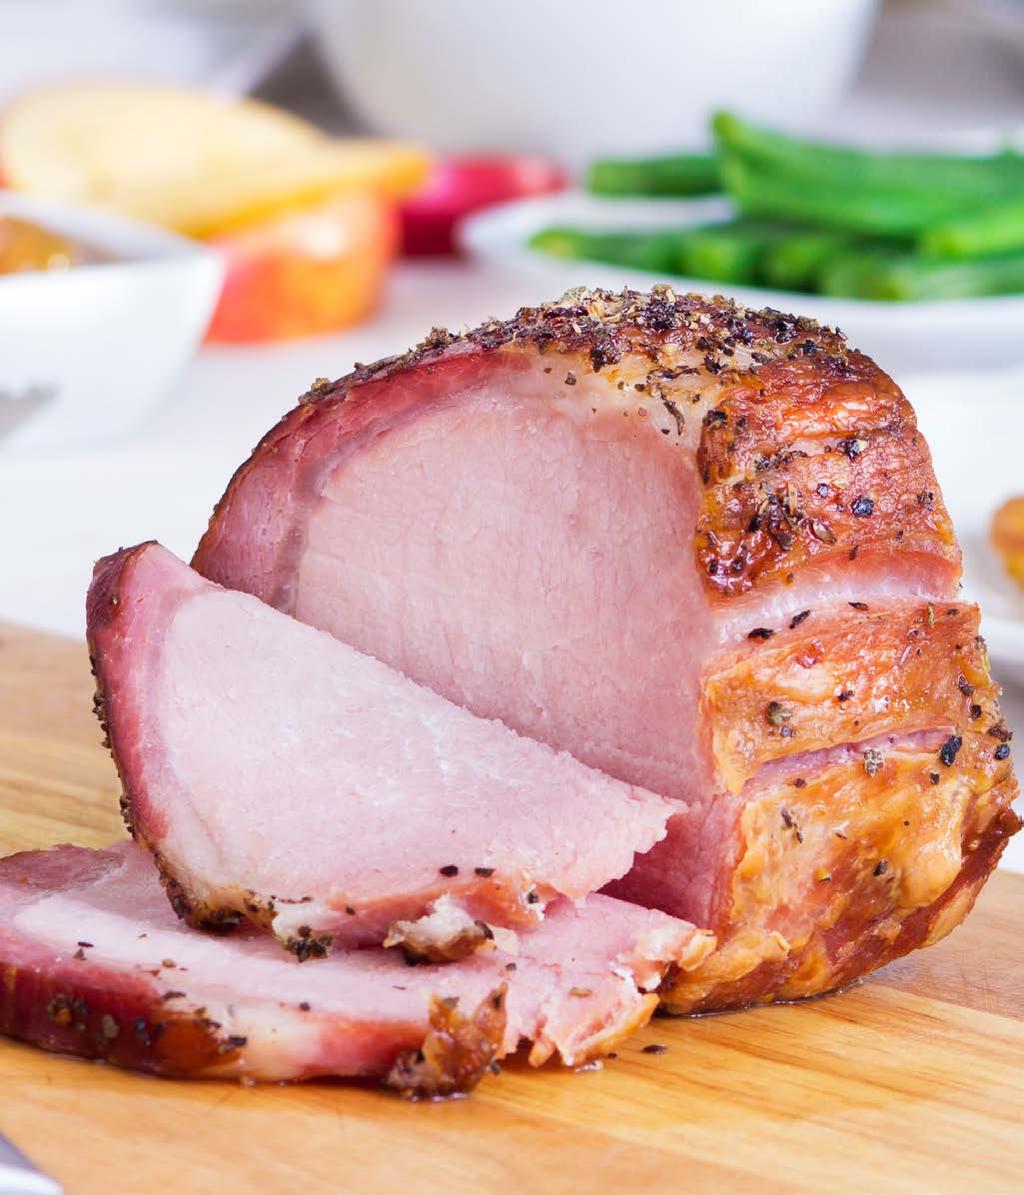 WELCOME Here at Browns Brothers we have over 20 years experience producing quality cooked and sliced meat products for the retail, wholesale, foodservice and manufacturing sectors.